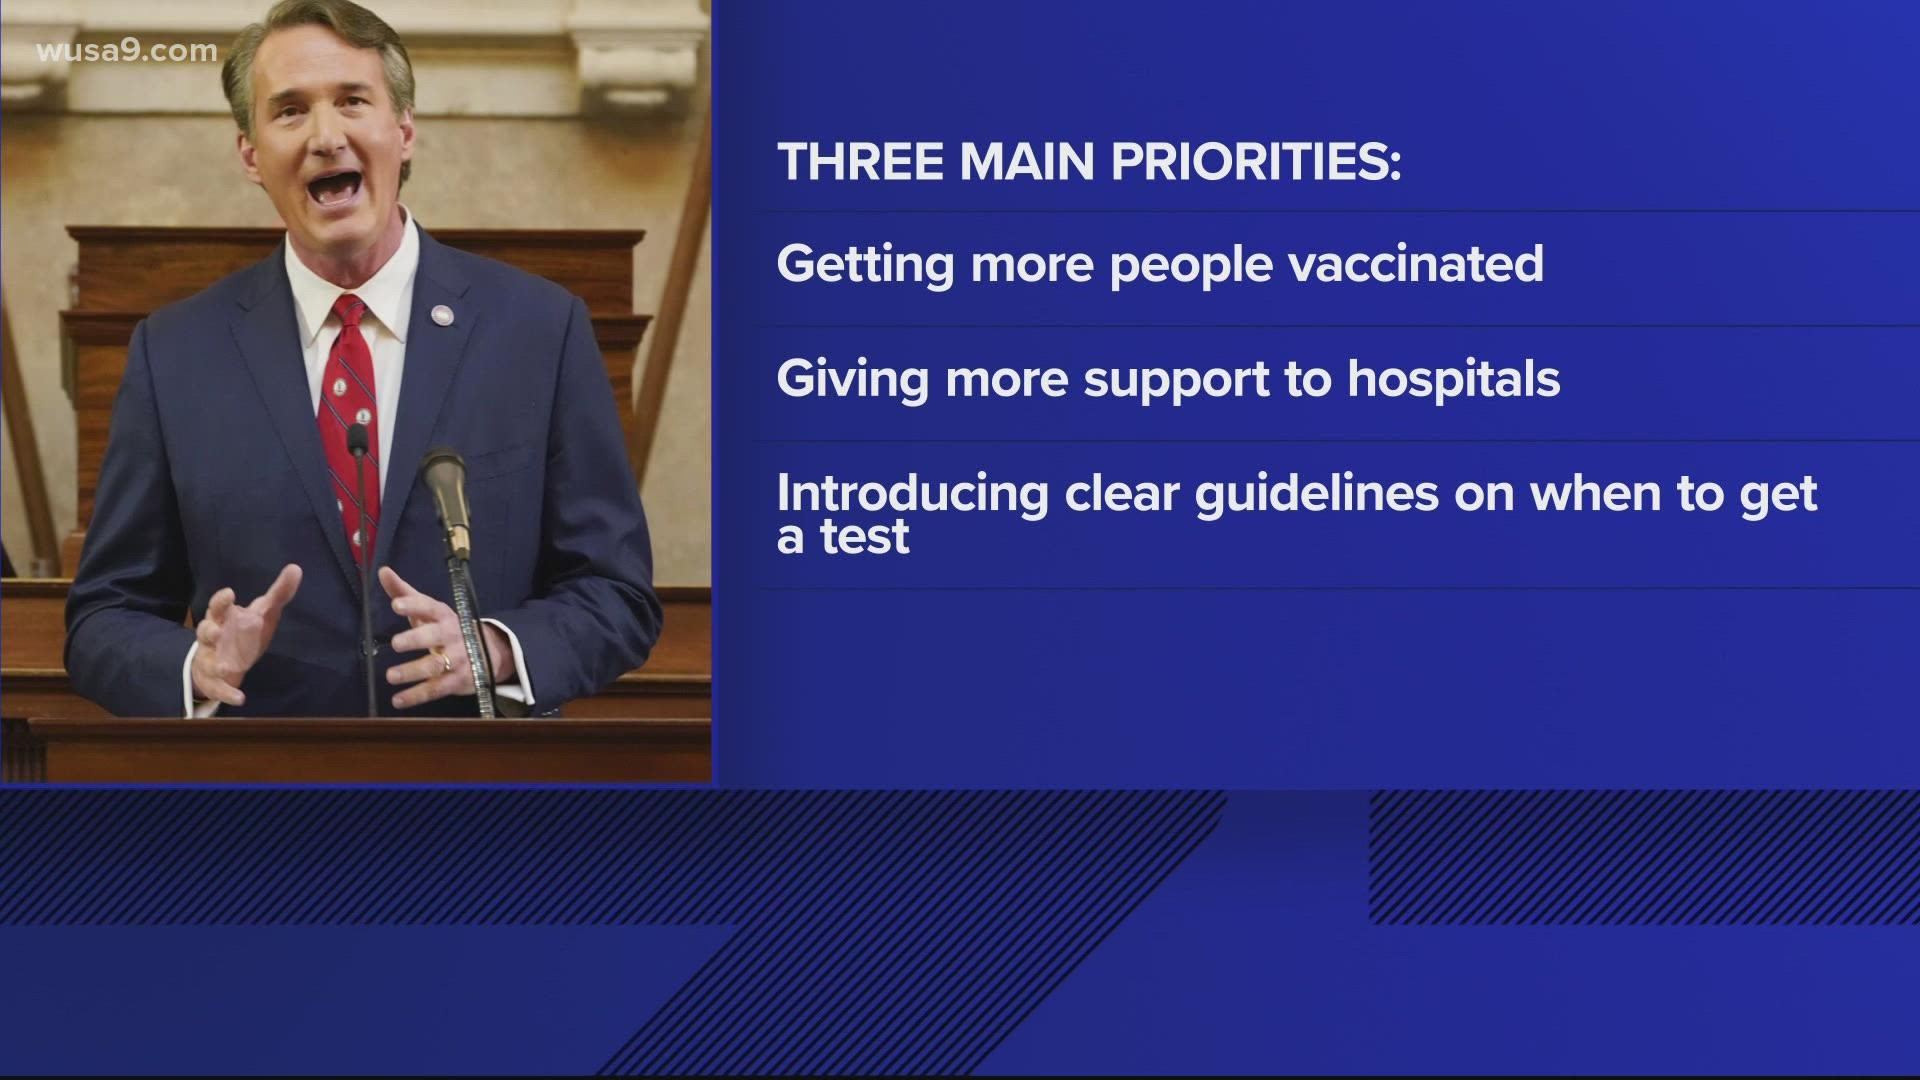 His priorities are getting more people vaccinated, giving support to hospitals, and introducing clear testing guidelines.